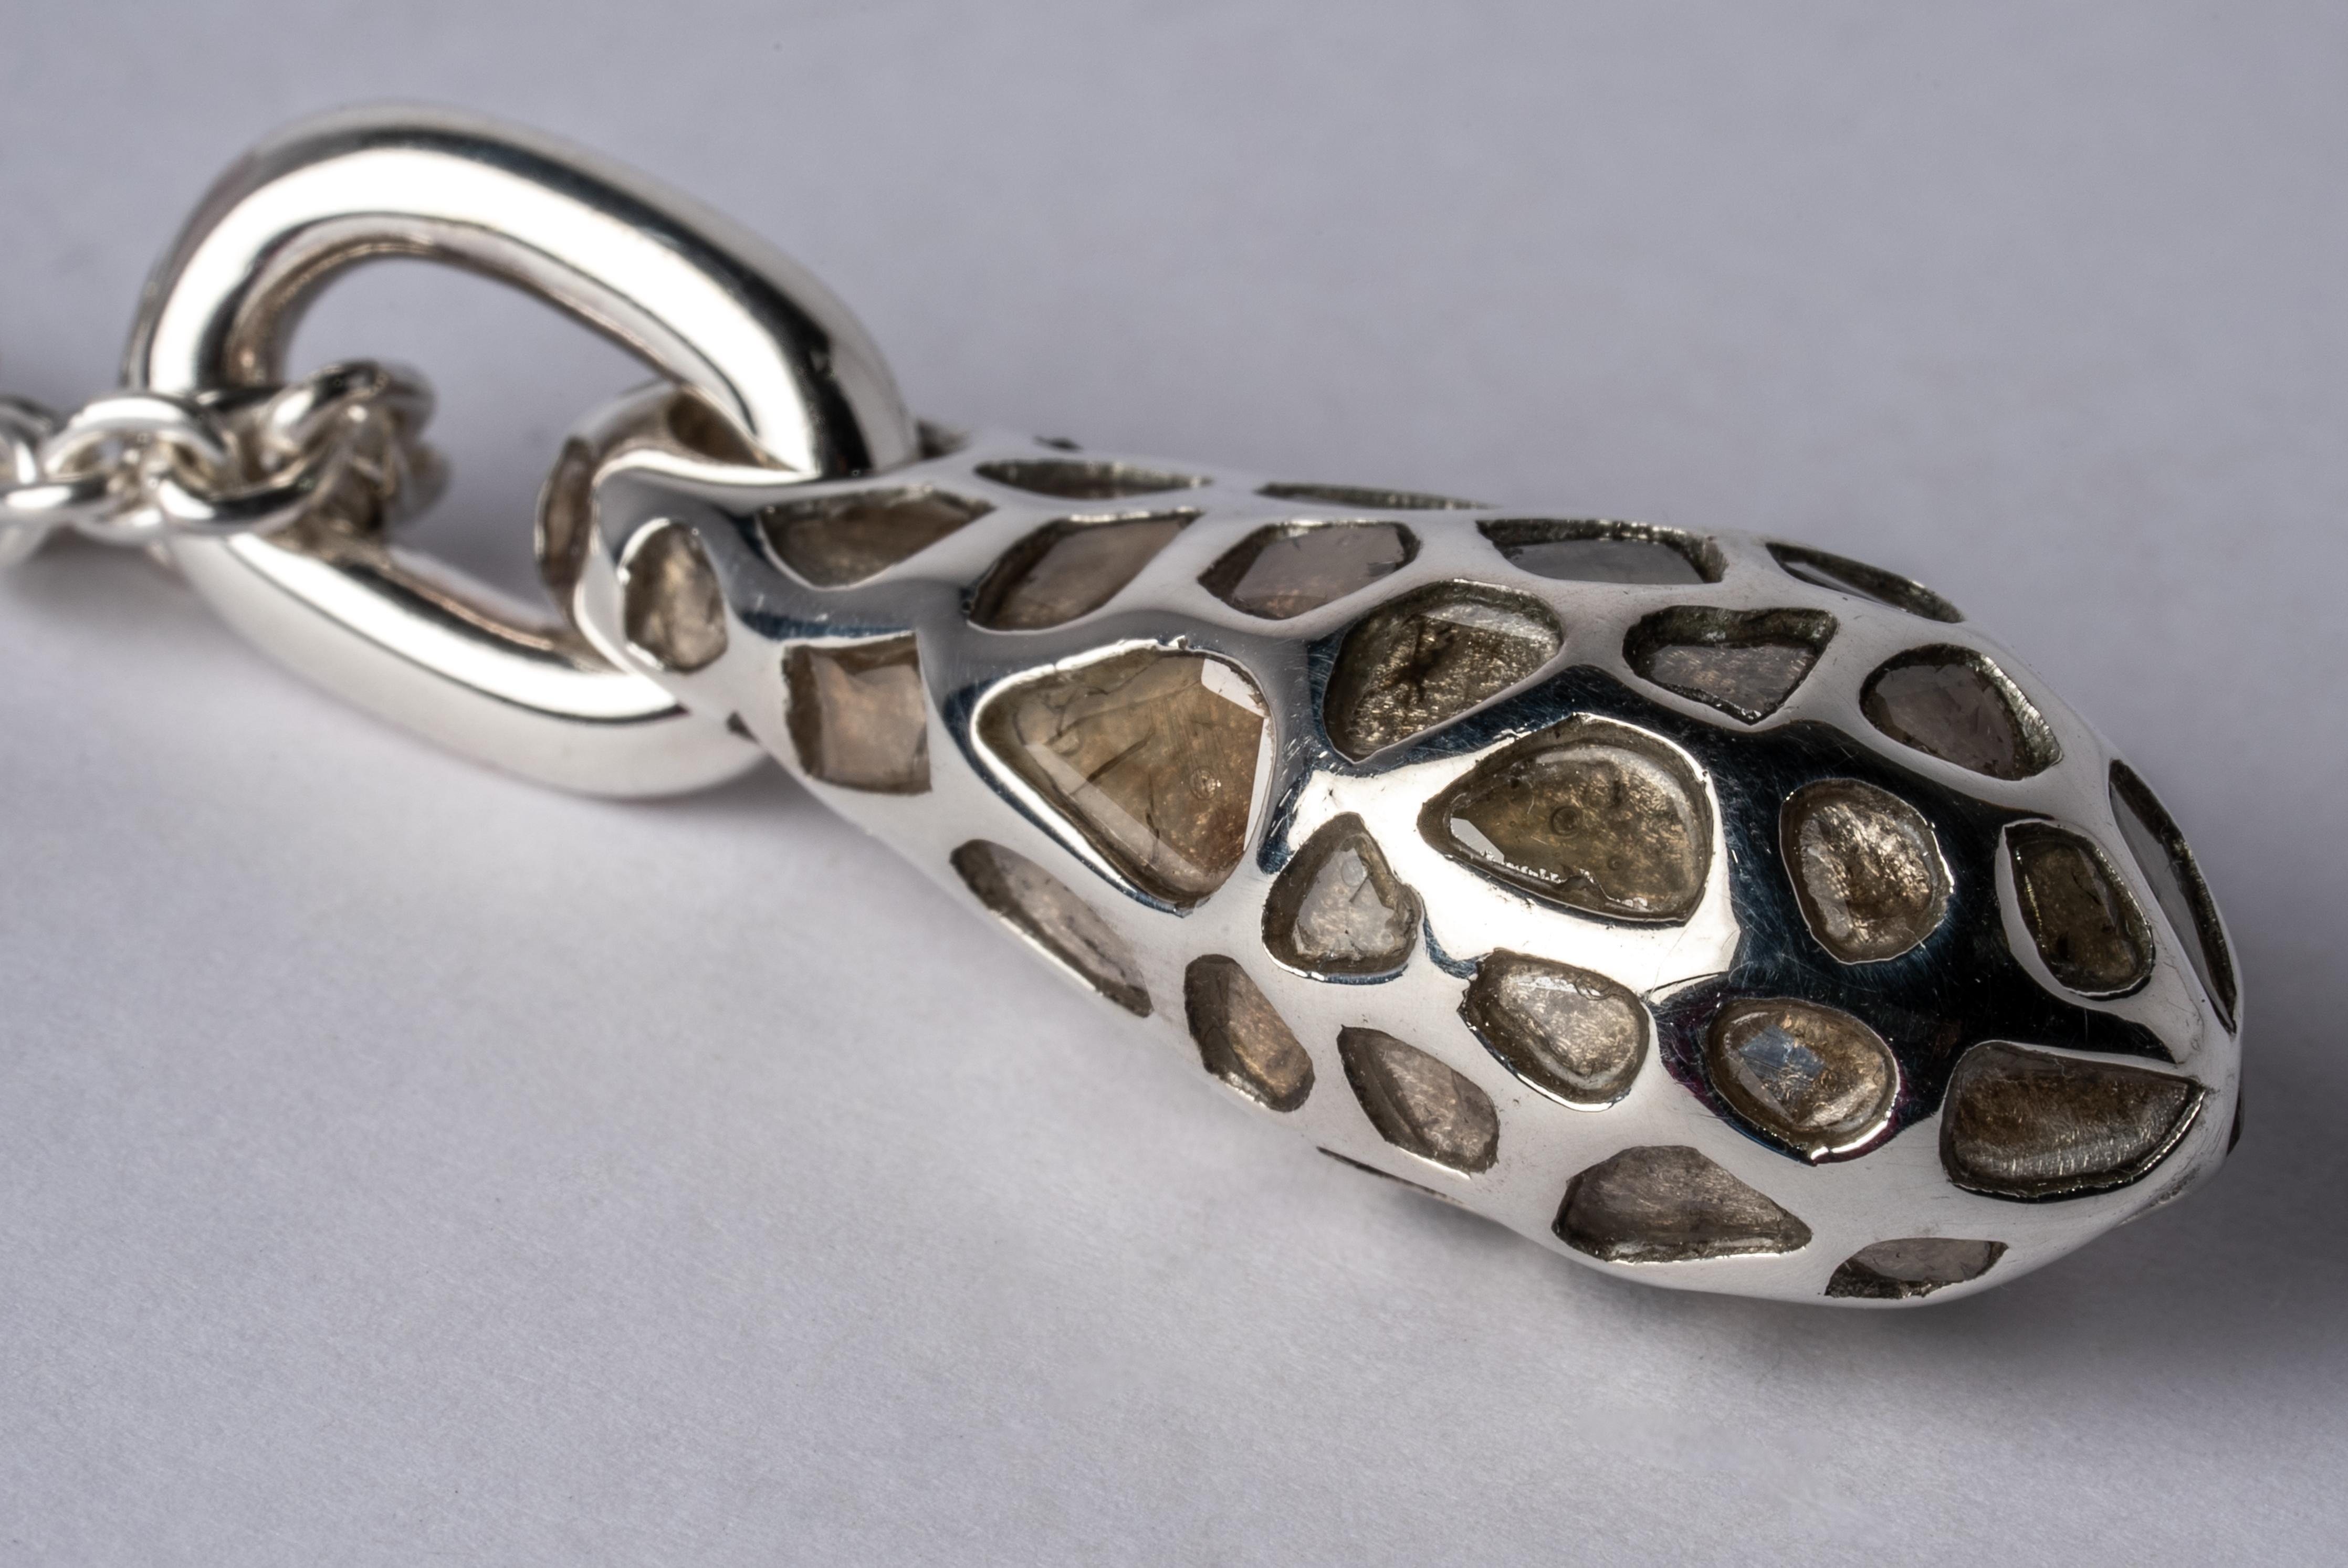 Pendant necklace in sterling silver and slabs of rough diamond set in mega pave setting. These slabs are removed from a larger chunk of diamond, it comes on a 74cm chain. This item is made with a naturally occurring element and will vary from the